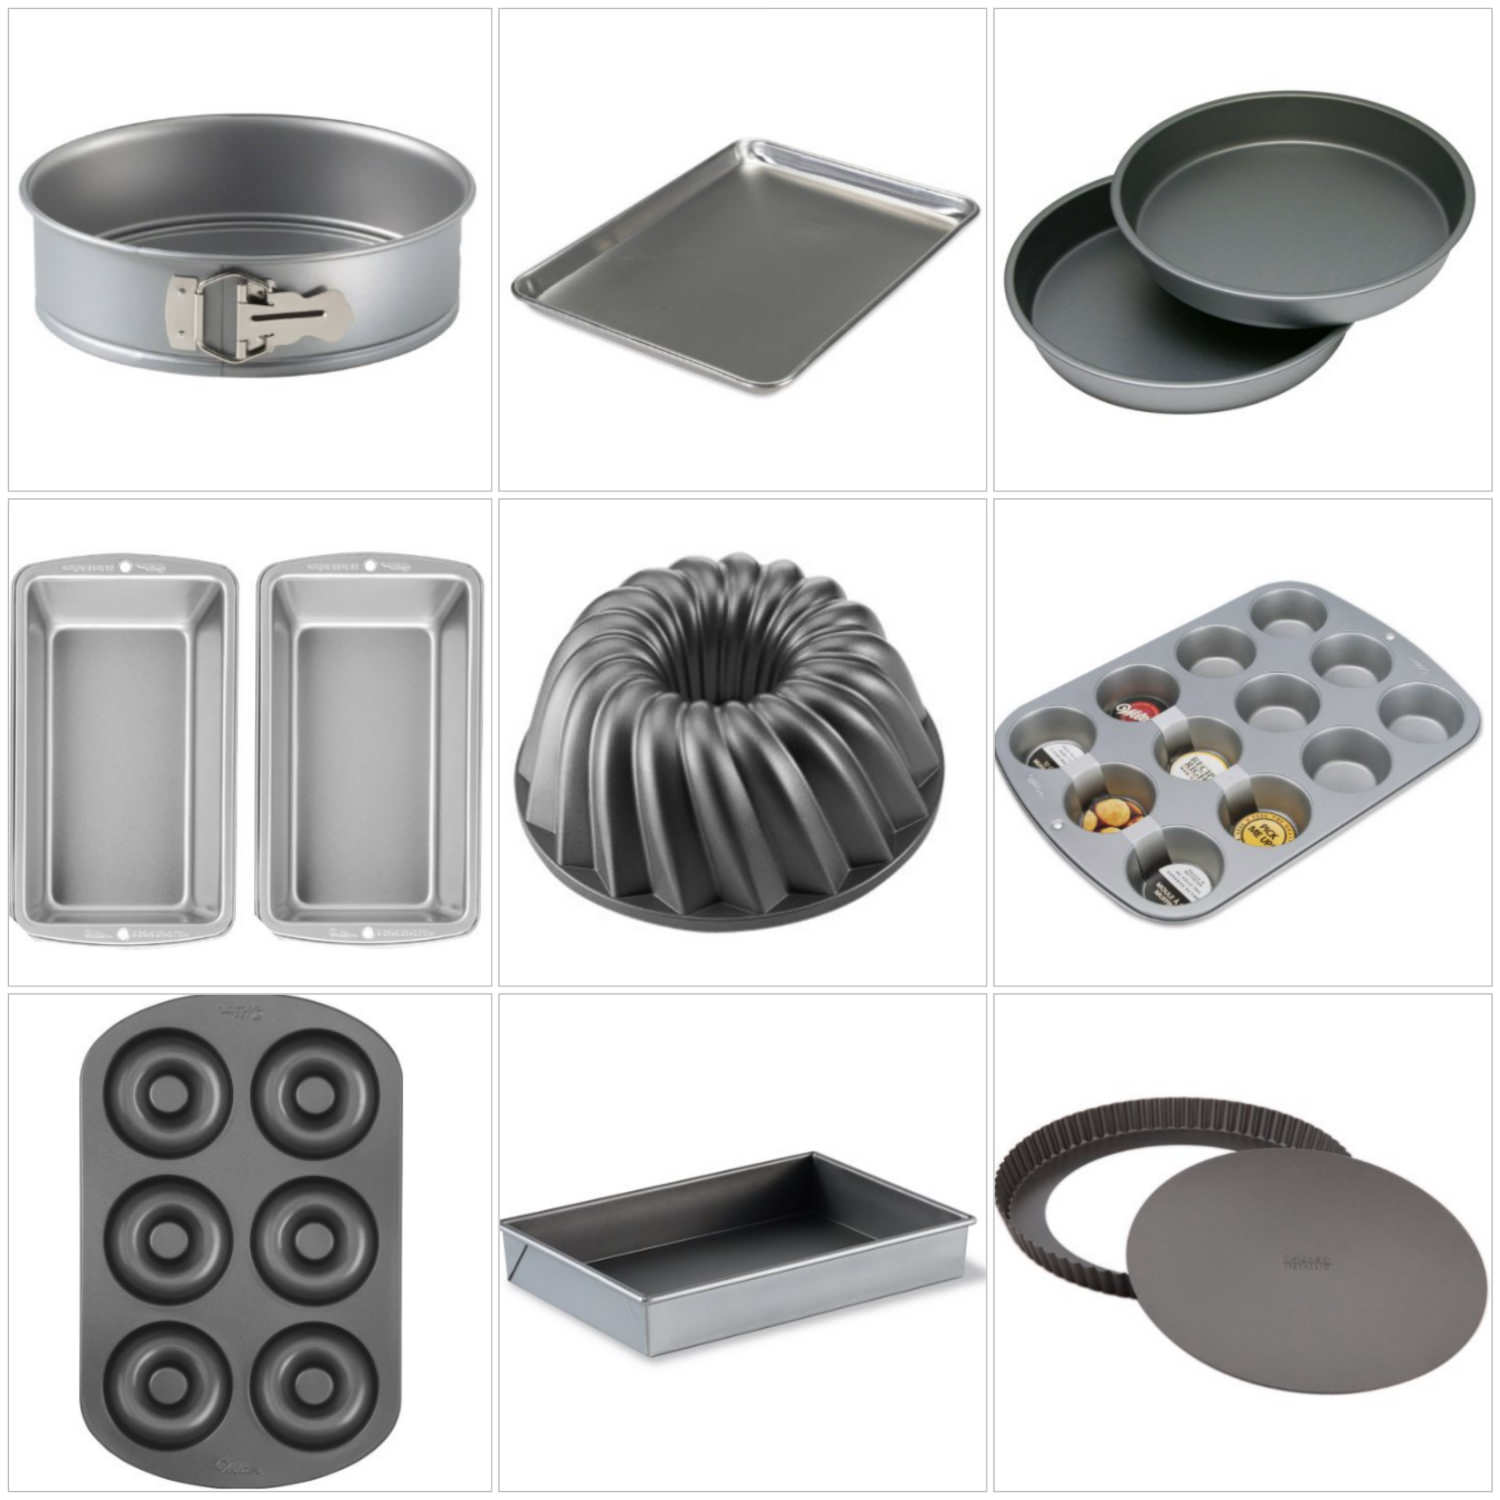 5 Different Kinds Of Cake Pans + What They're For